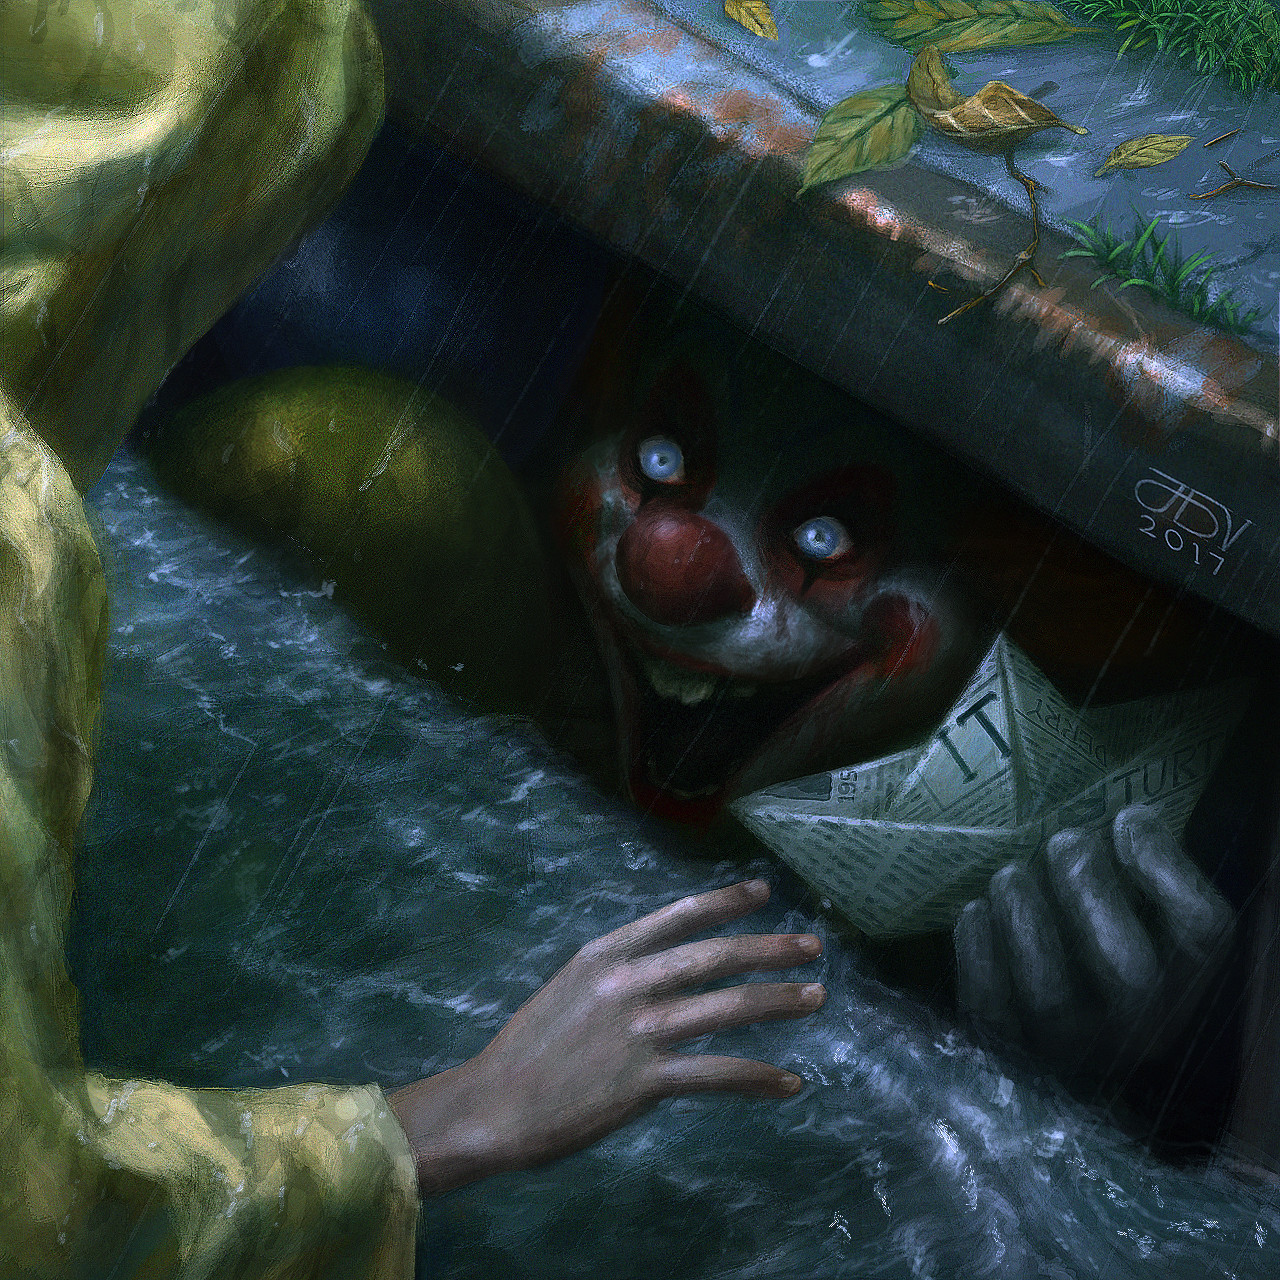 "Everything down here floats."Fanart of Pennywise the Clown talki...